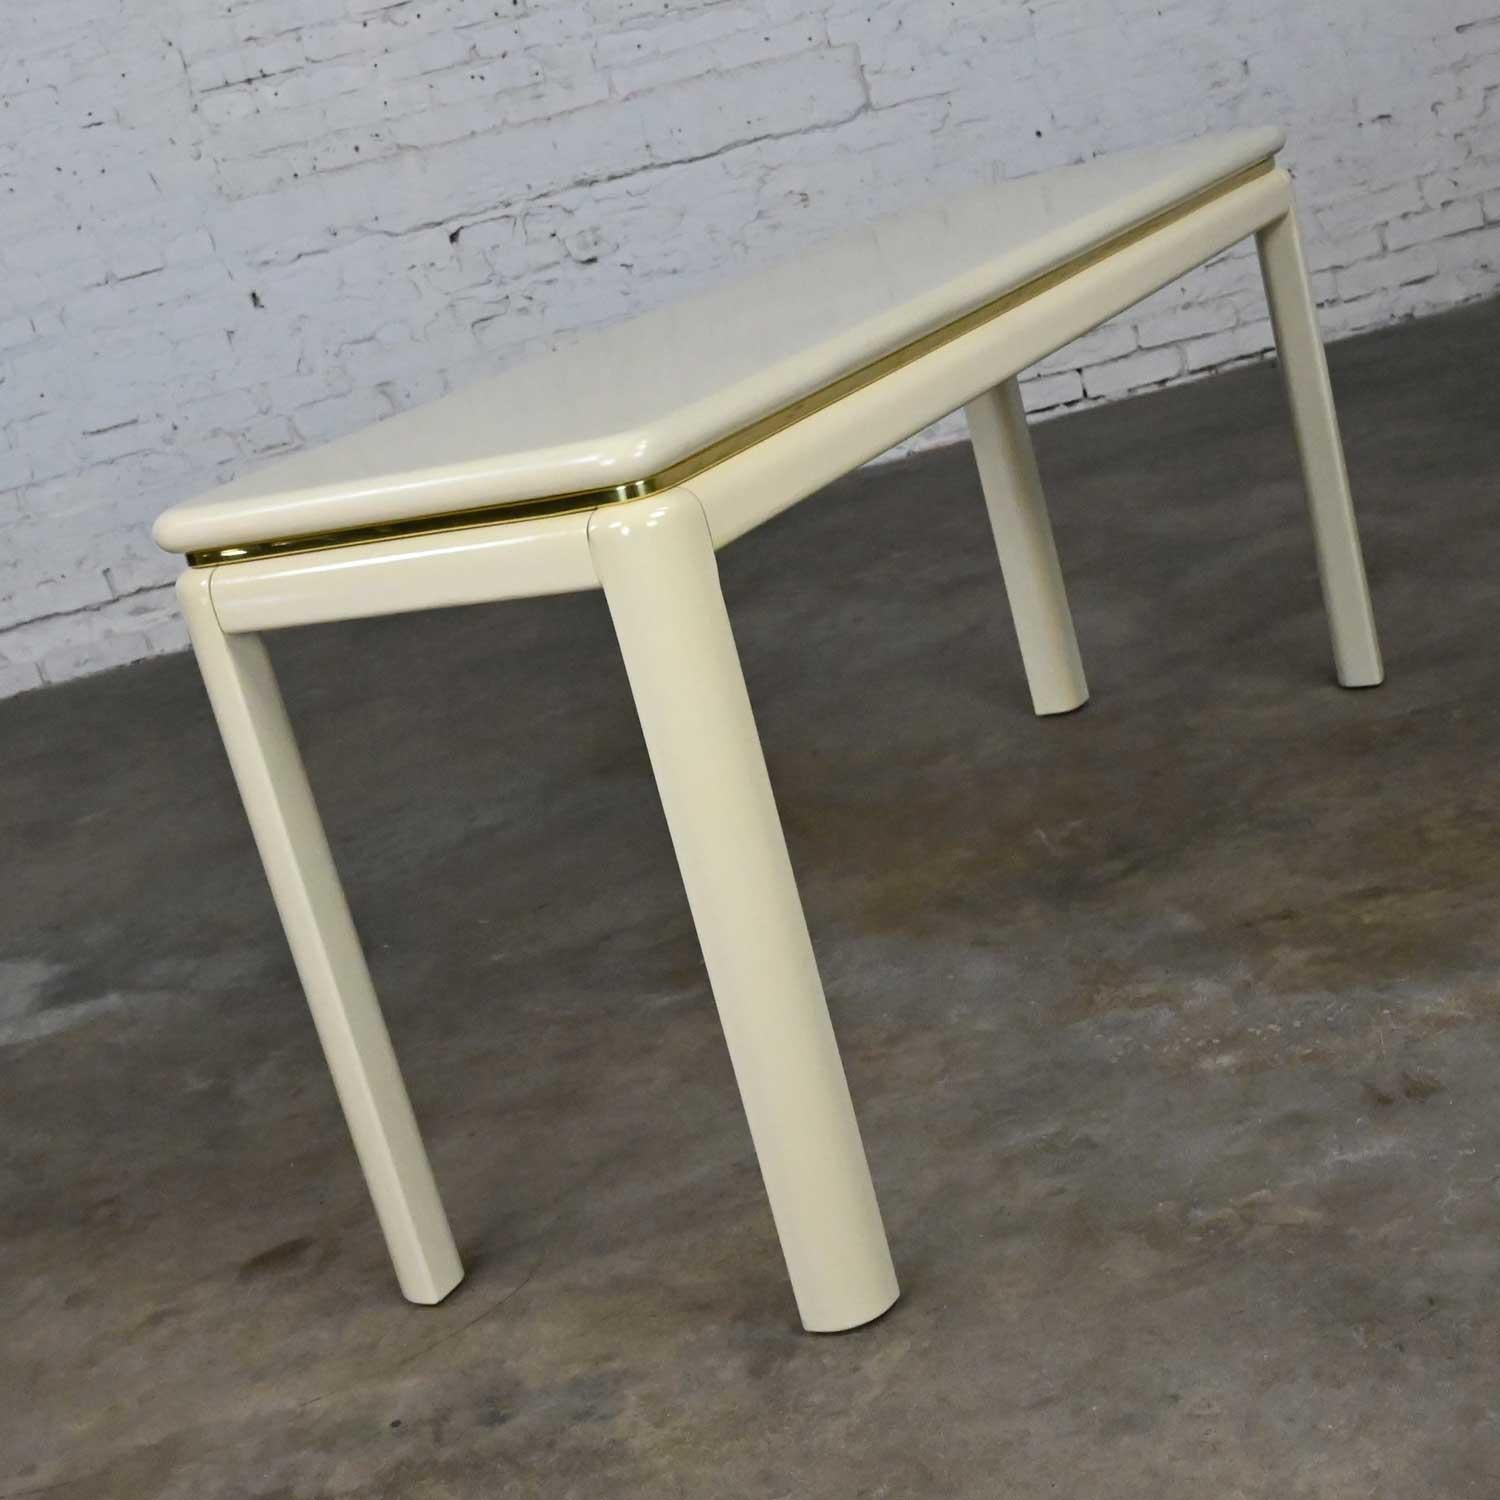 Late 20th Century Vintage Modern Art Deco Revival Lane Sofa Console Table White Lacquer Brass Trim For Sale